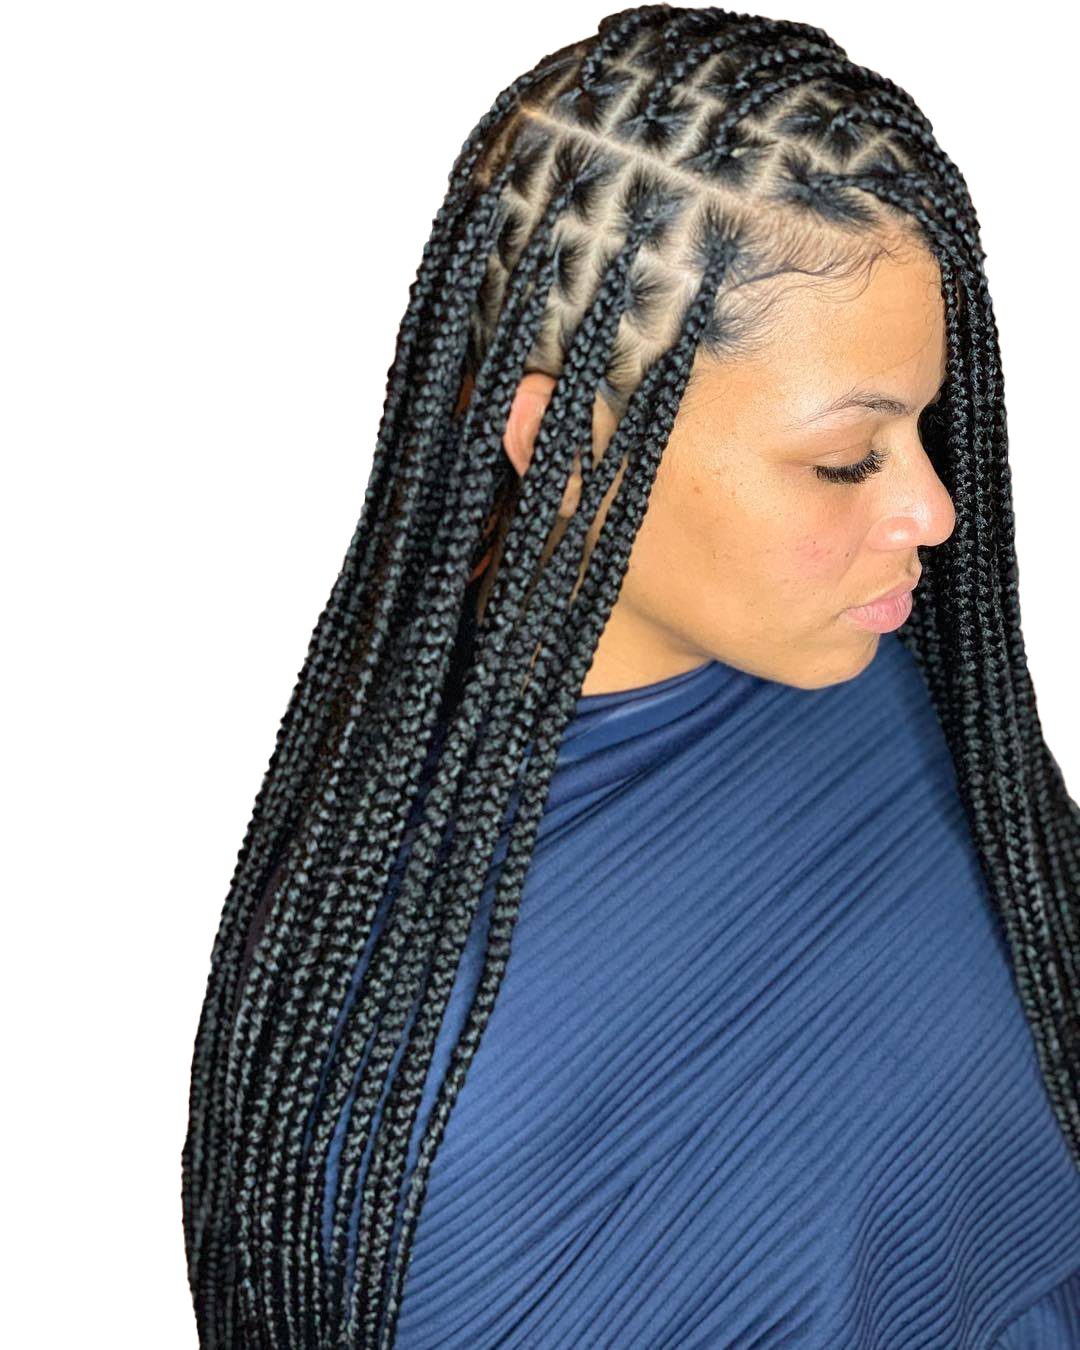 Picture Hairstyle Braids PNG File HD PNG Image